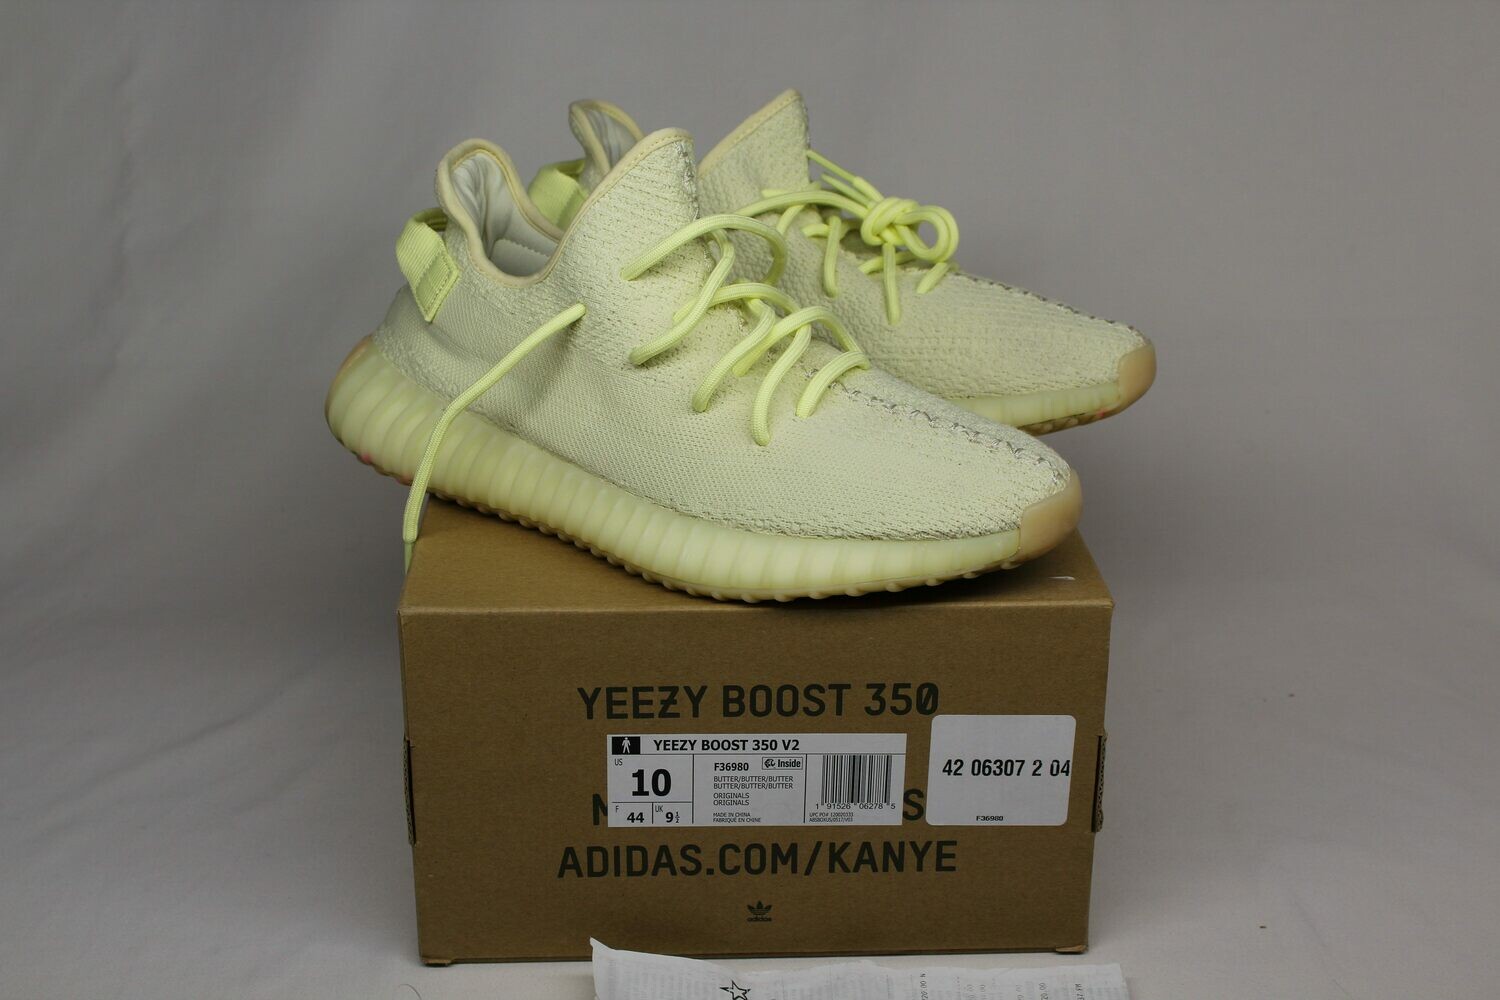 yeezy butter size 10